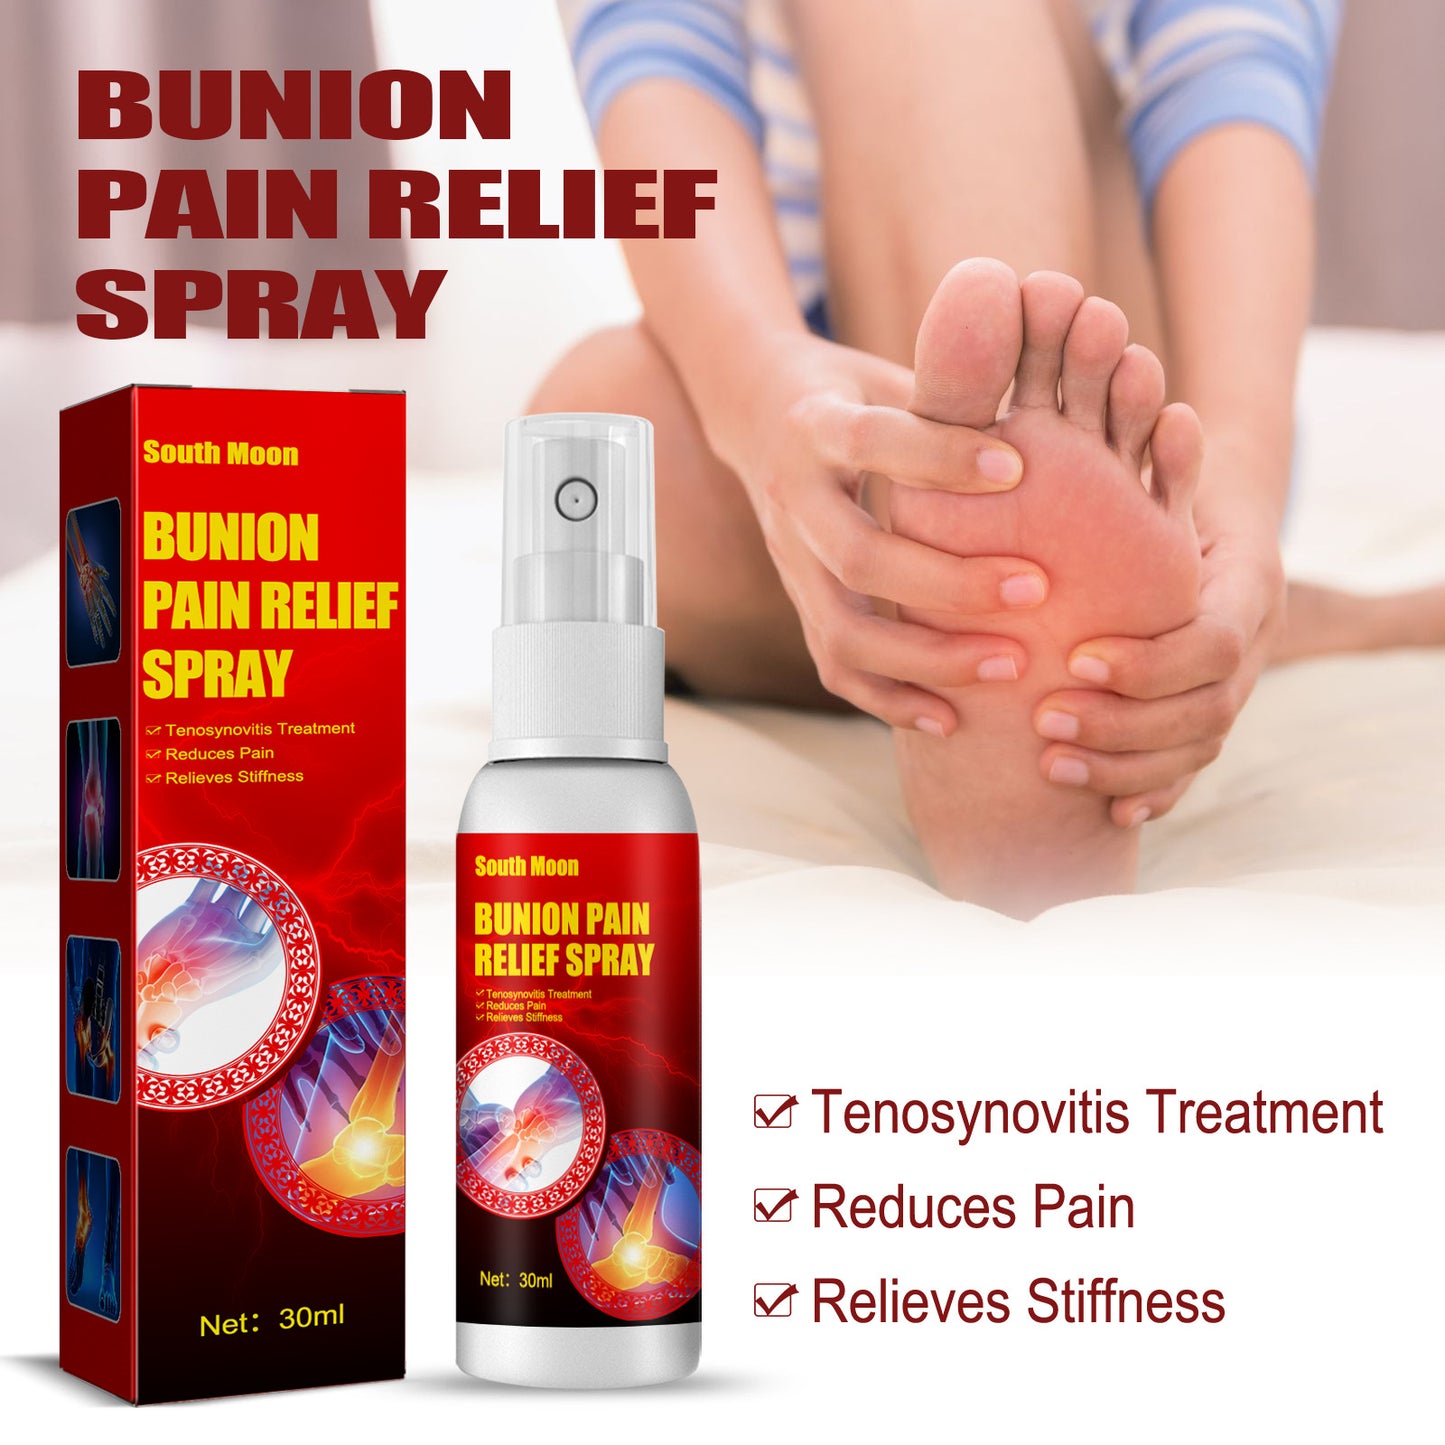 Soothing Joint Swelling Waist And Leg Pain Hand Numbness Activating Muscles And Bones Spray